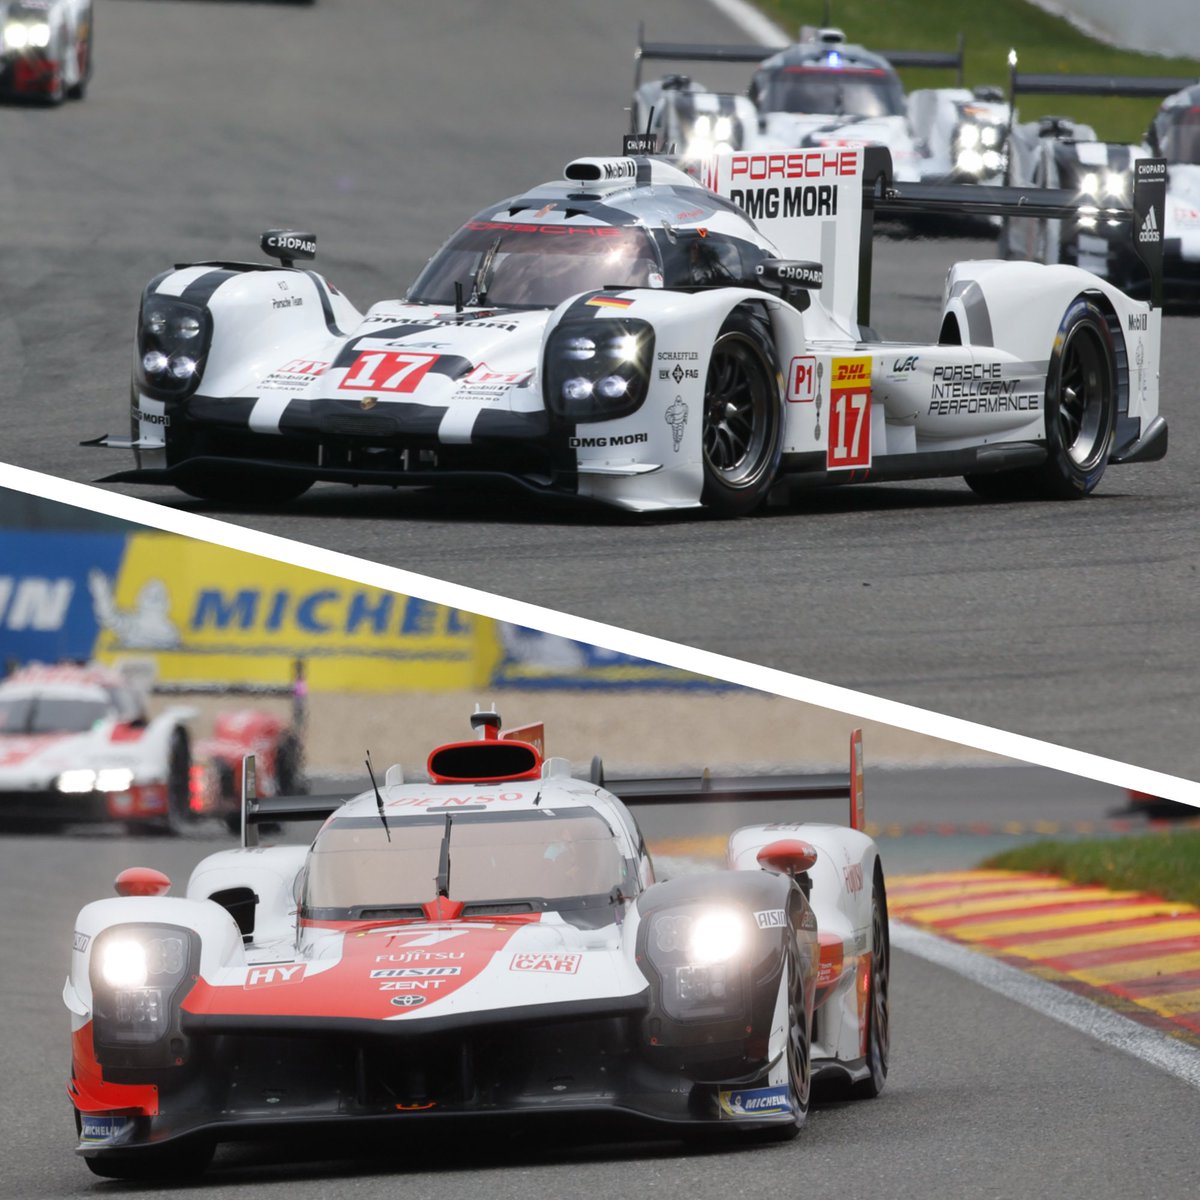 #WEC LMP1 vs. Hypercar pole position qualifying times at the 6 Hours of Spa 

𝗟𝗠𝗣𝟭 1:54.767 Porsche 919 Hybrid (2015)
𝗛𝘆𝗽𝗲𝗿𝗰𝗮𝗿 2:00.812 Toyota GR010 Hybrid (2023)

📸 Michelin